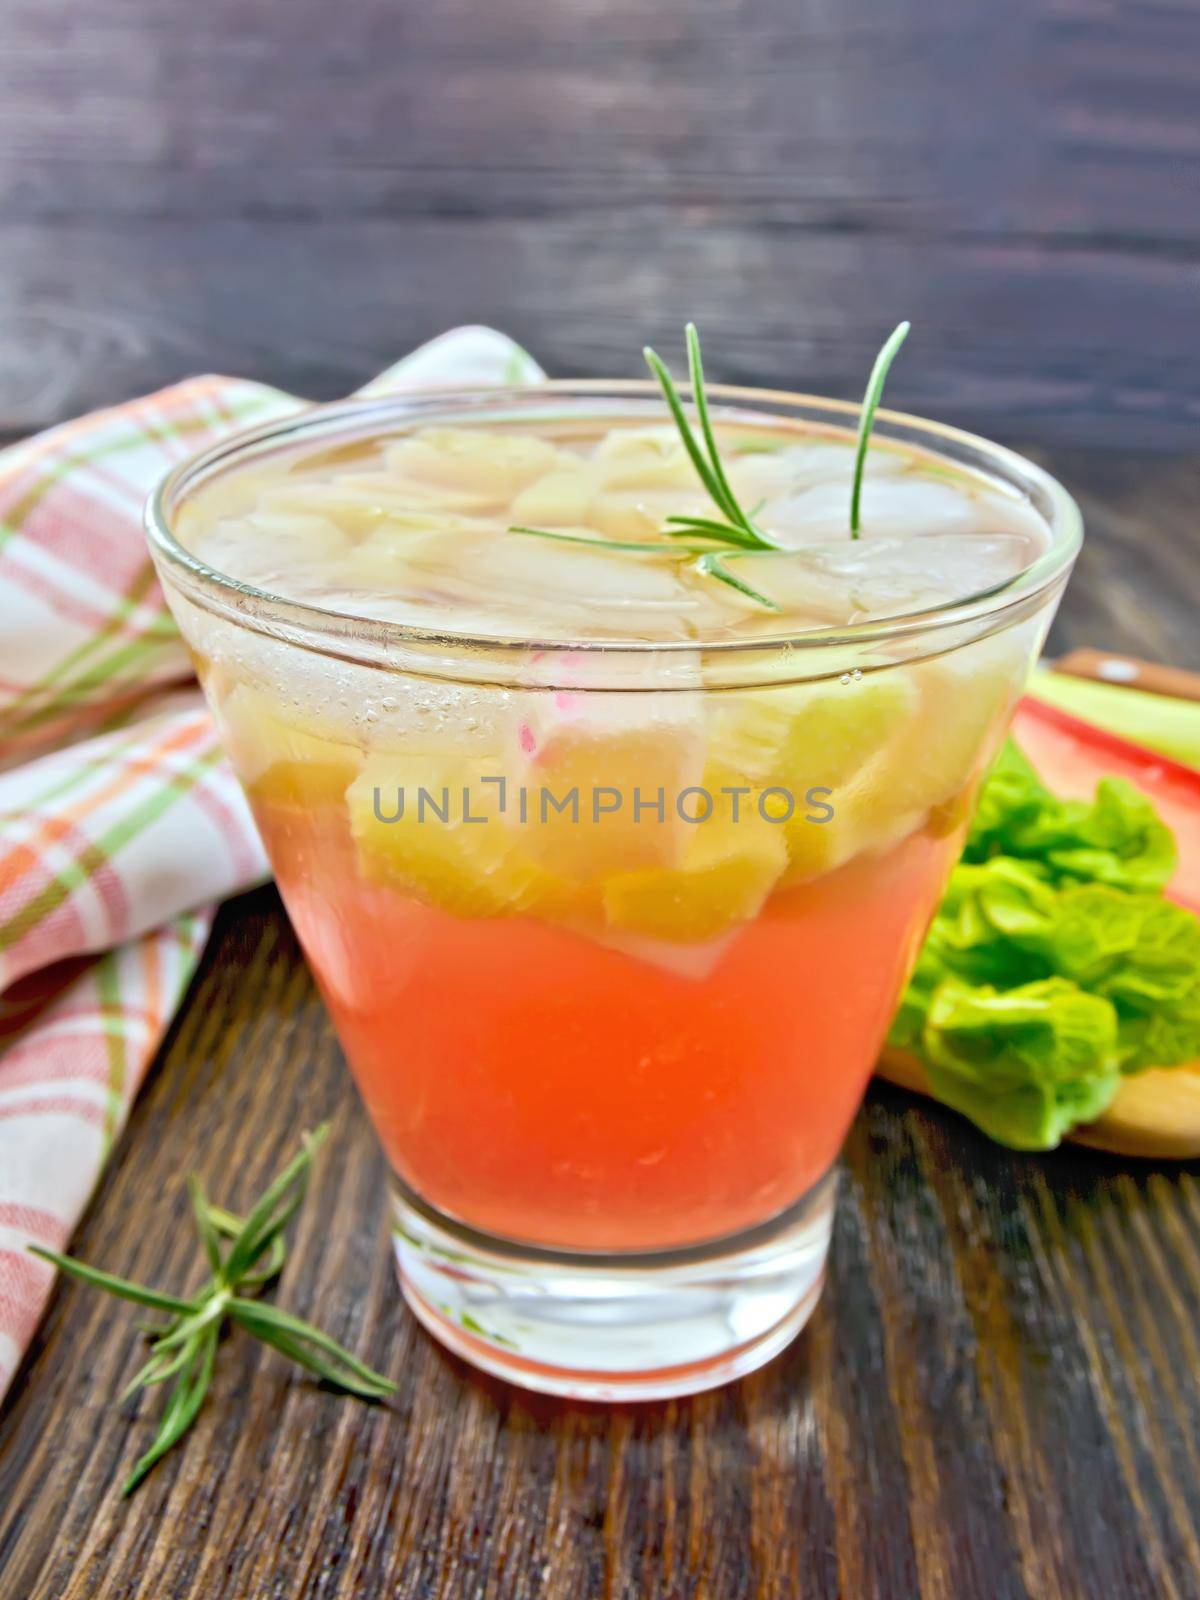 Lemonade with rhubarb and rosemary on board by rezkrr